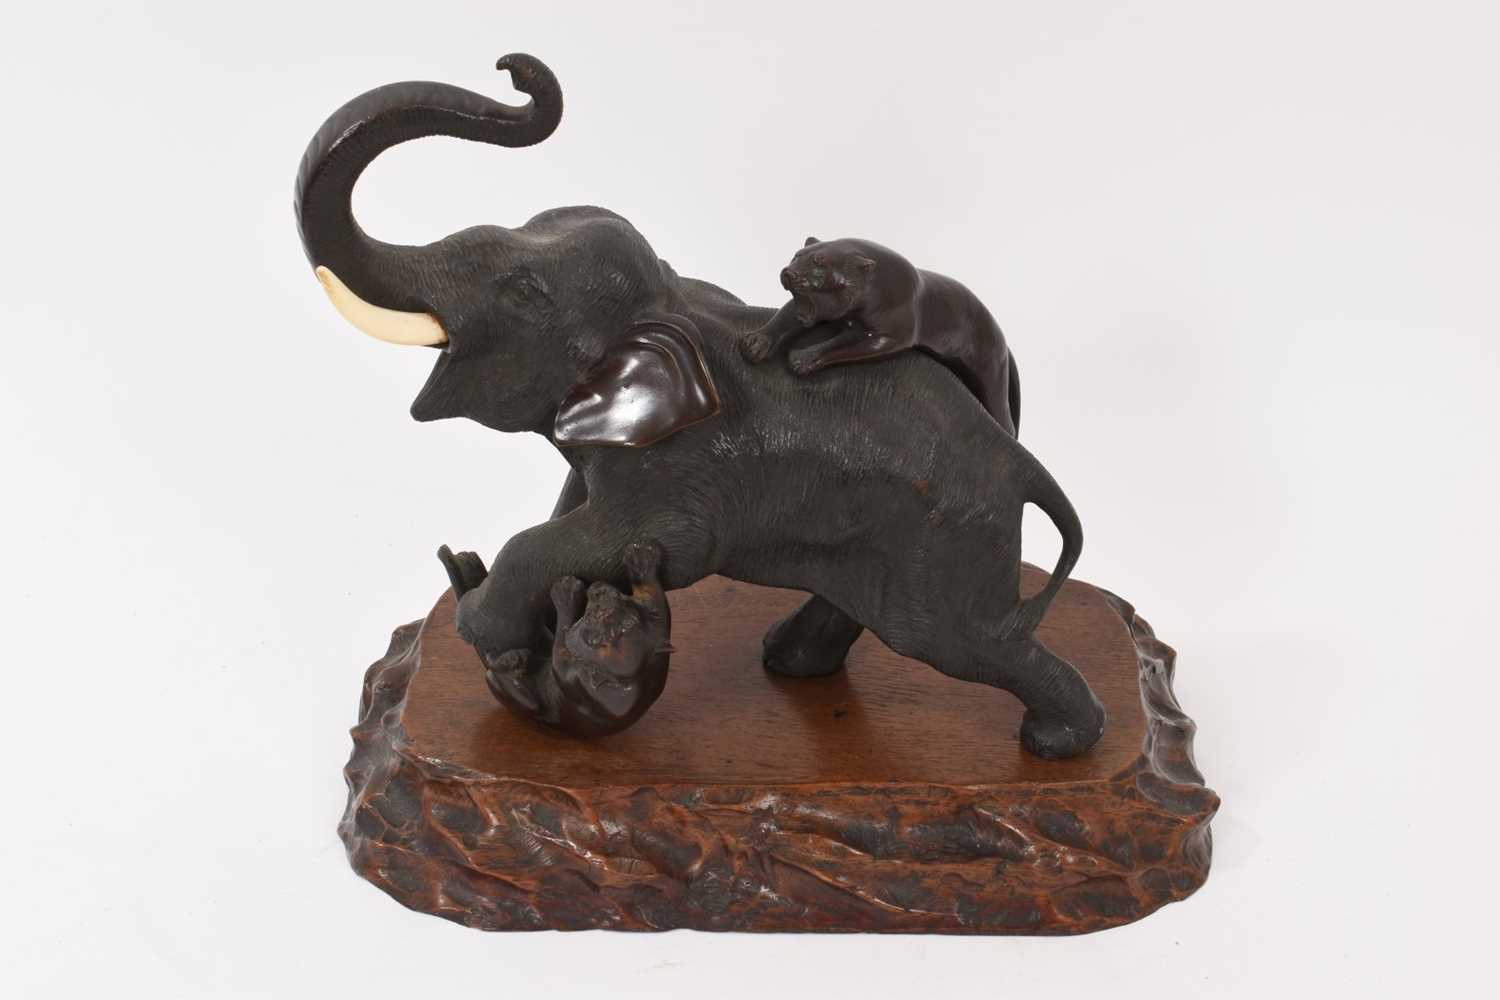 Late 19th century/early 20th century Japanese bronze sculpture of an elephant